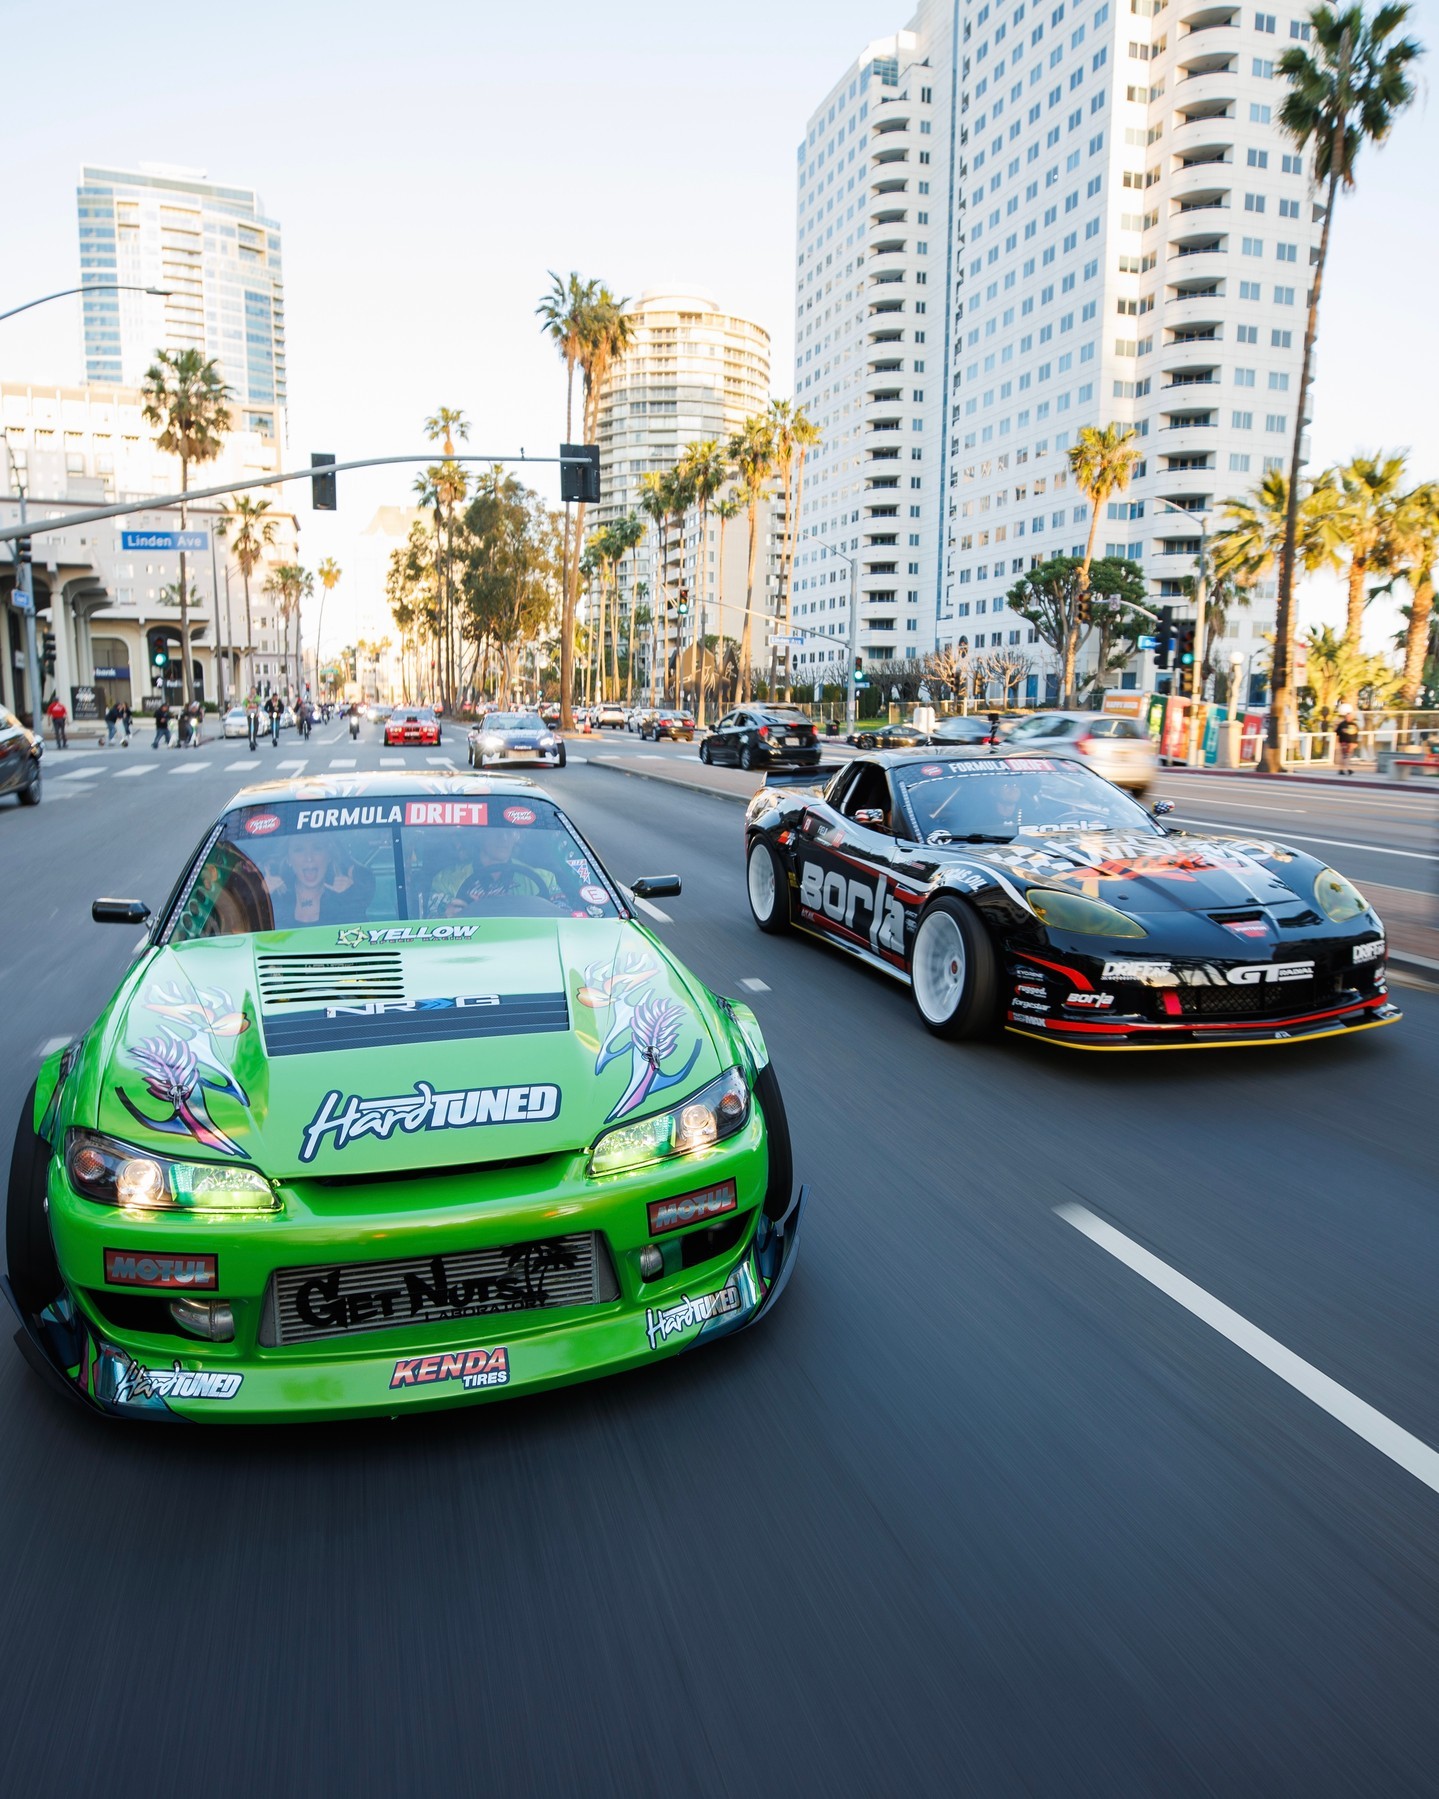 Last night's Formula DRIFT Parade was just a taste of the adrenaline-fueled action to come. We're ready to put on a show for our amazing fans today! 

@ForrestWang808 | @KendaMotorsports & @MattField777 | @GTRadialUSA